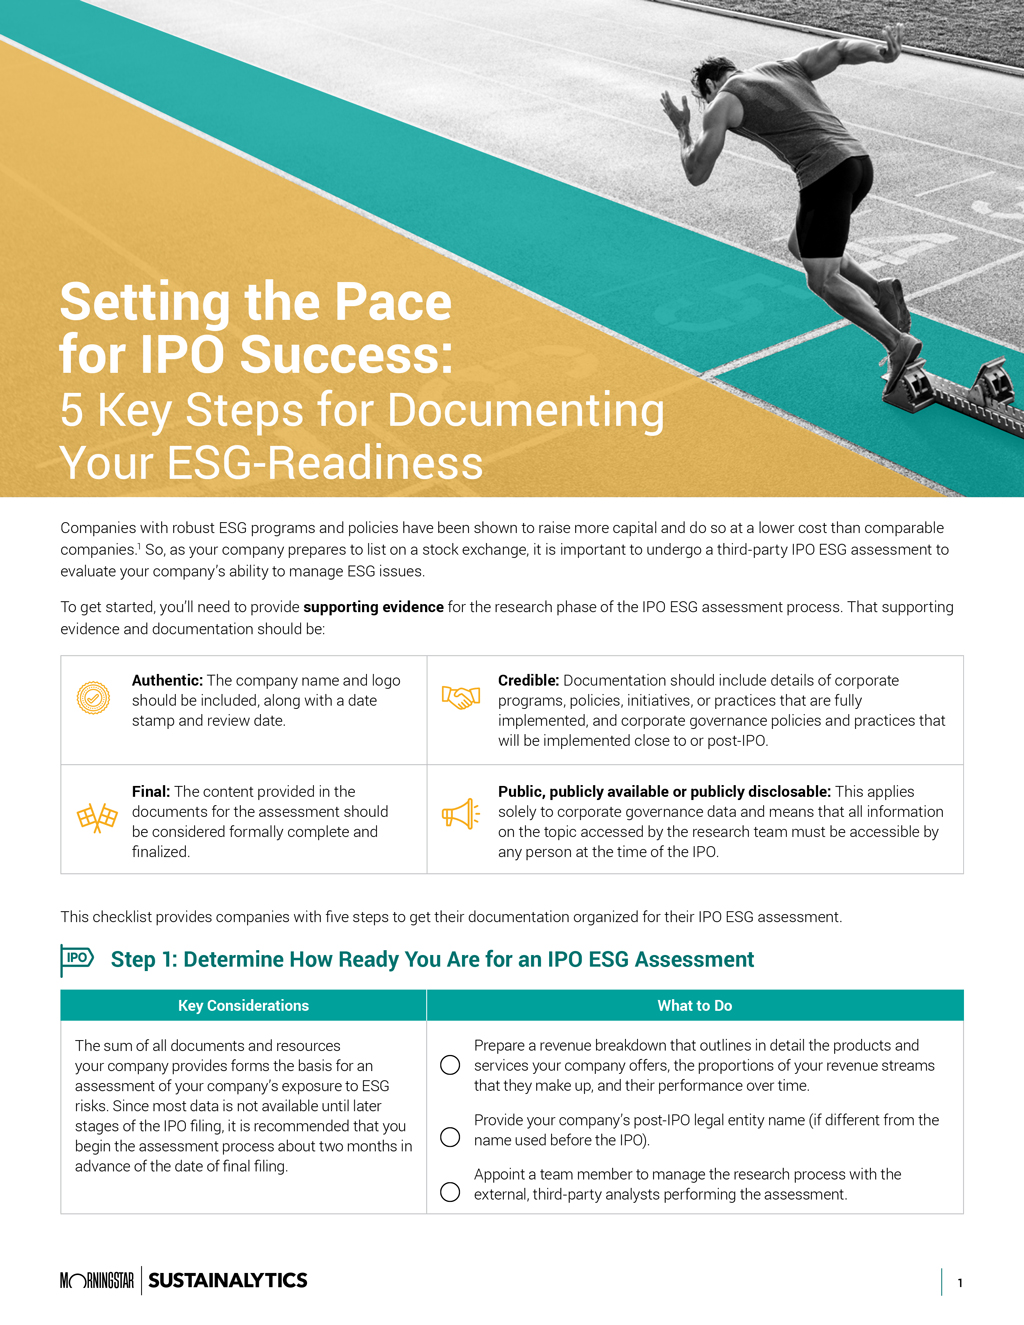 Download our checklist, Setting the Pace for IPO Success, to learn how to document your ESG-readiness